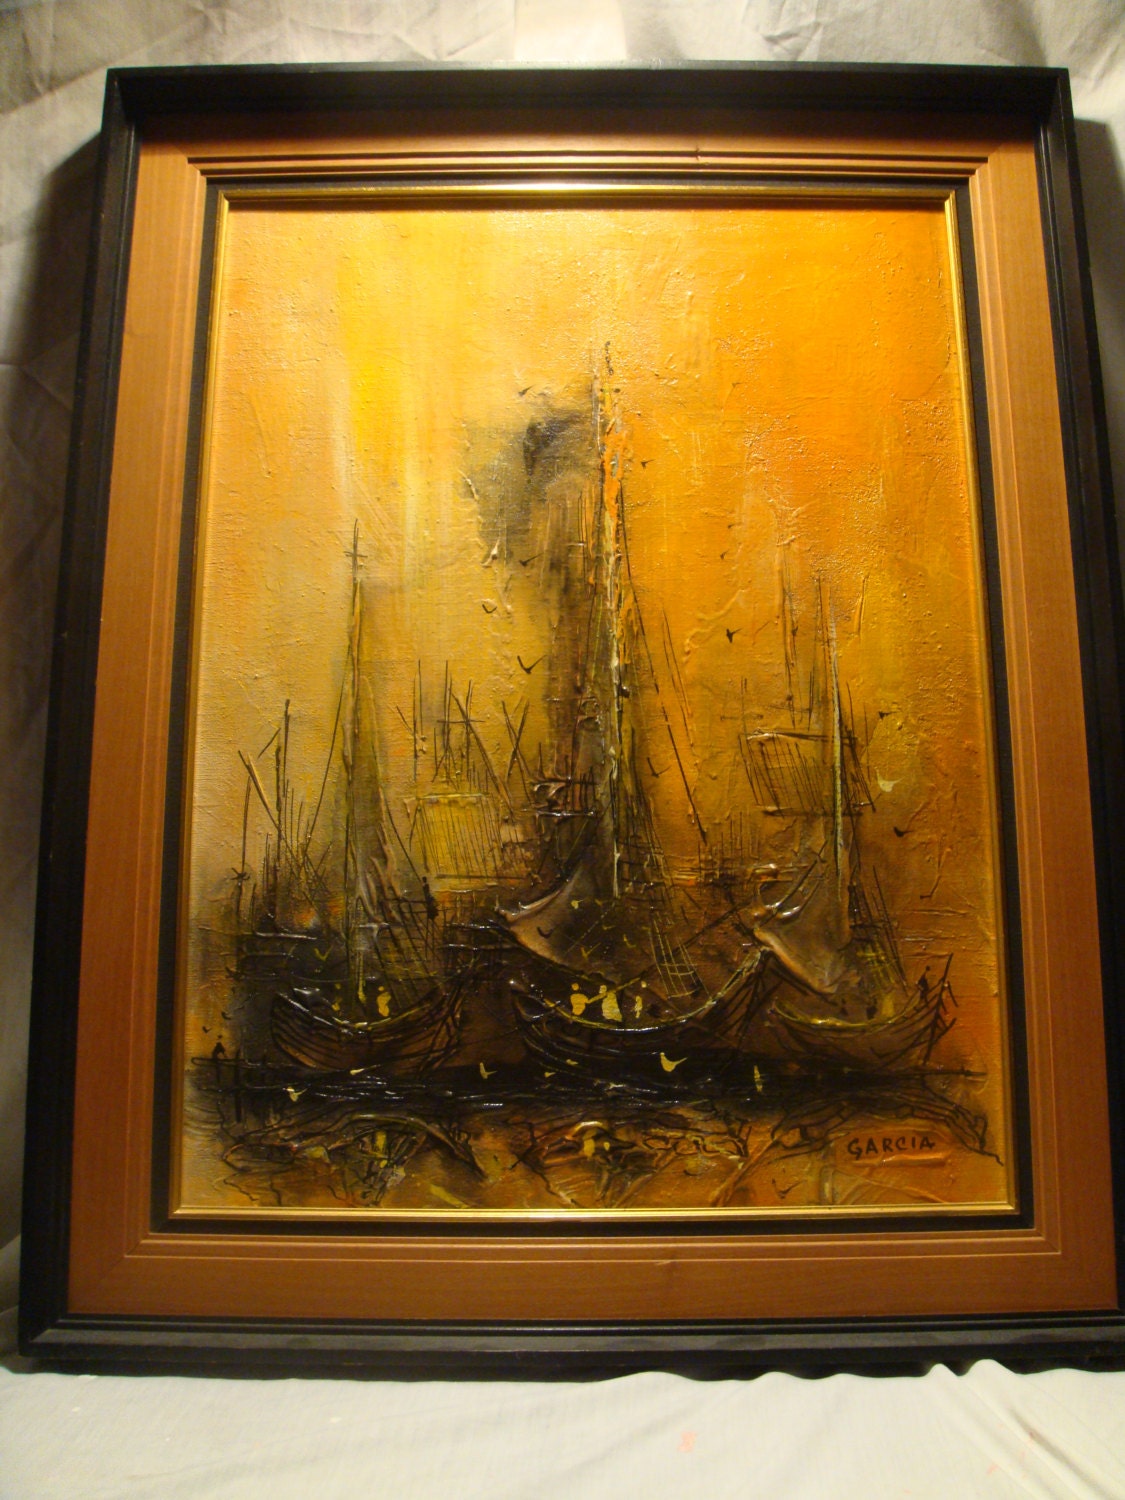 Tall Masts painting by Danny Garcia1125 x 1500